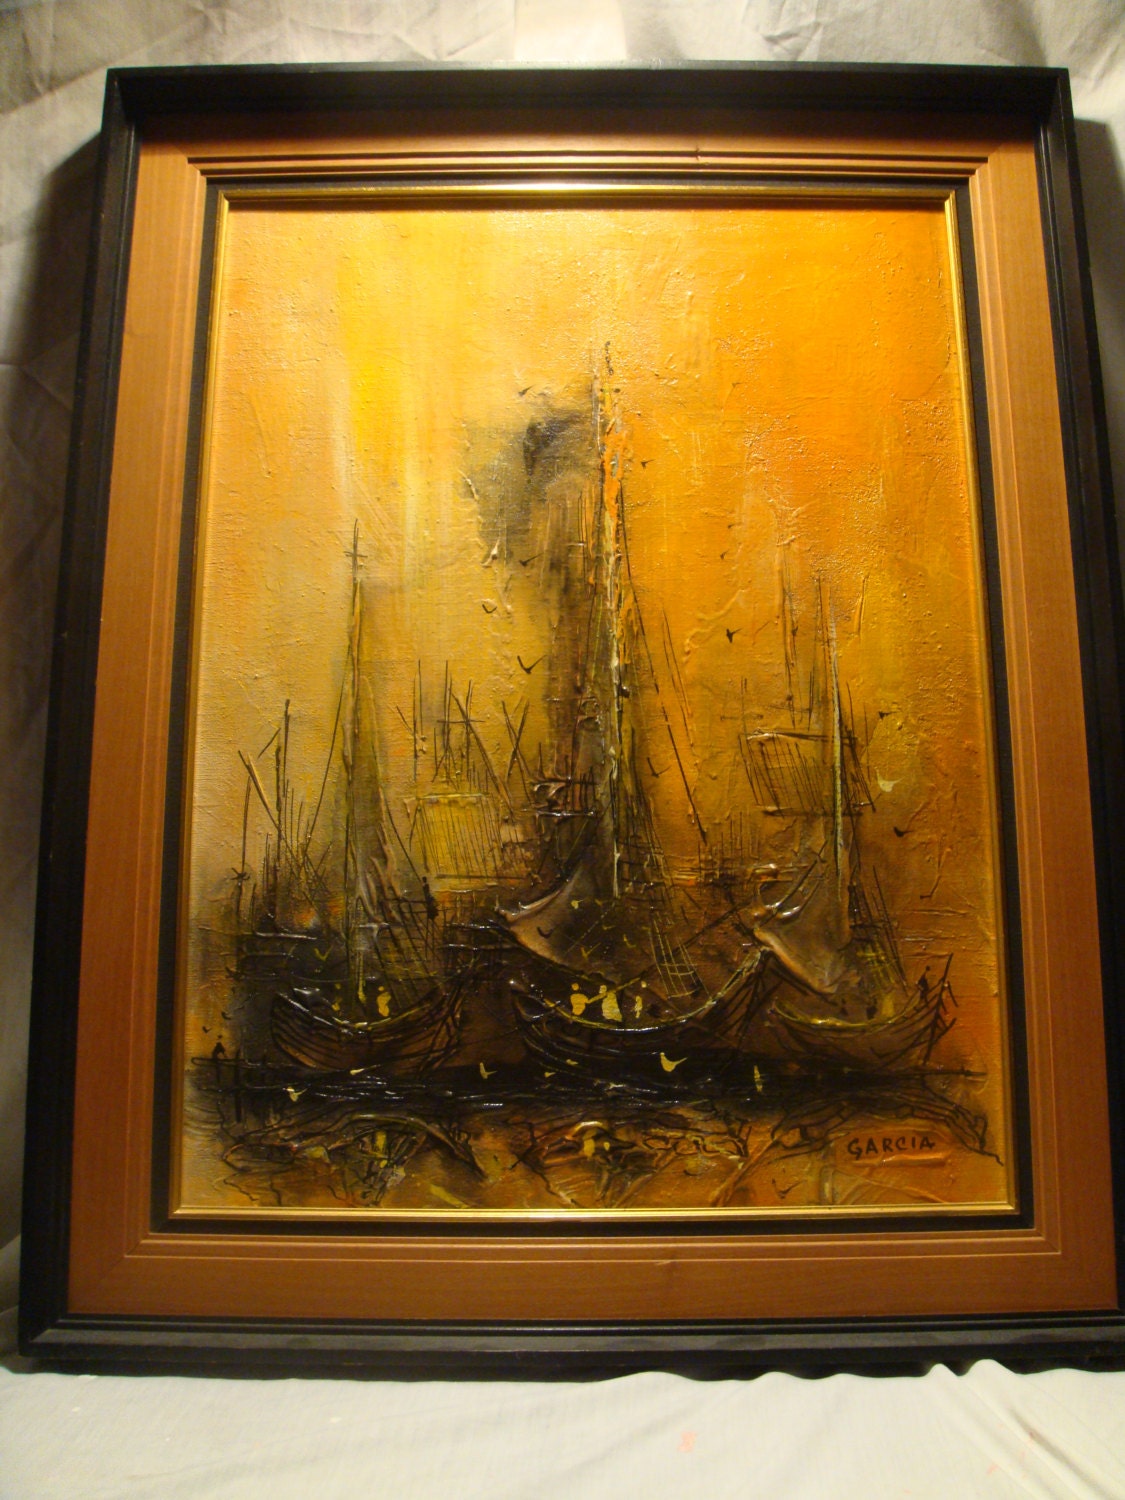 Tall Masts painting by Danny Garcia1125 x 1500